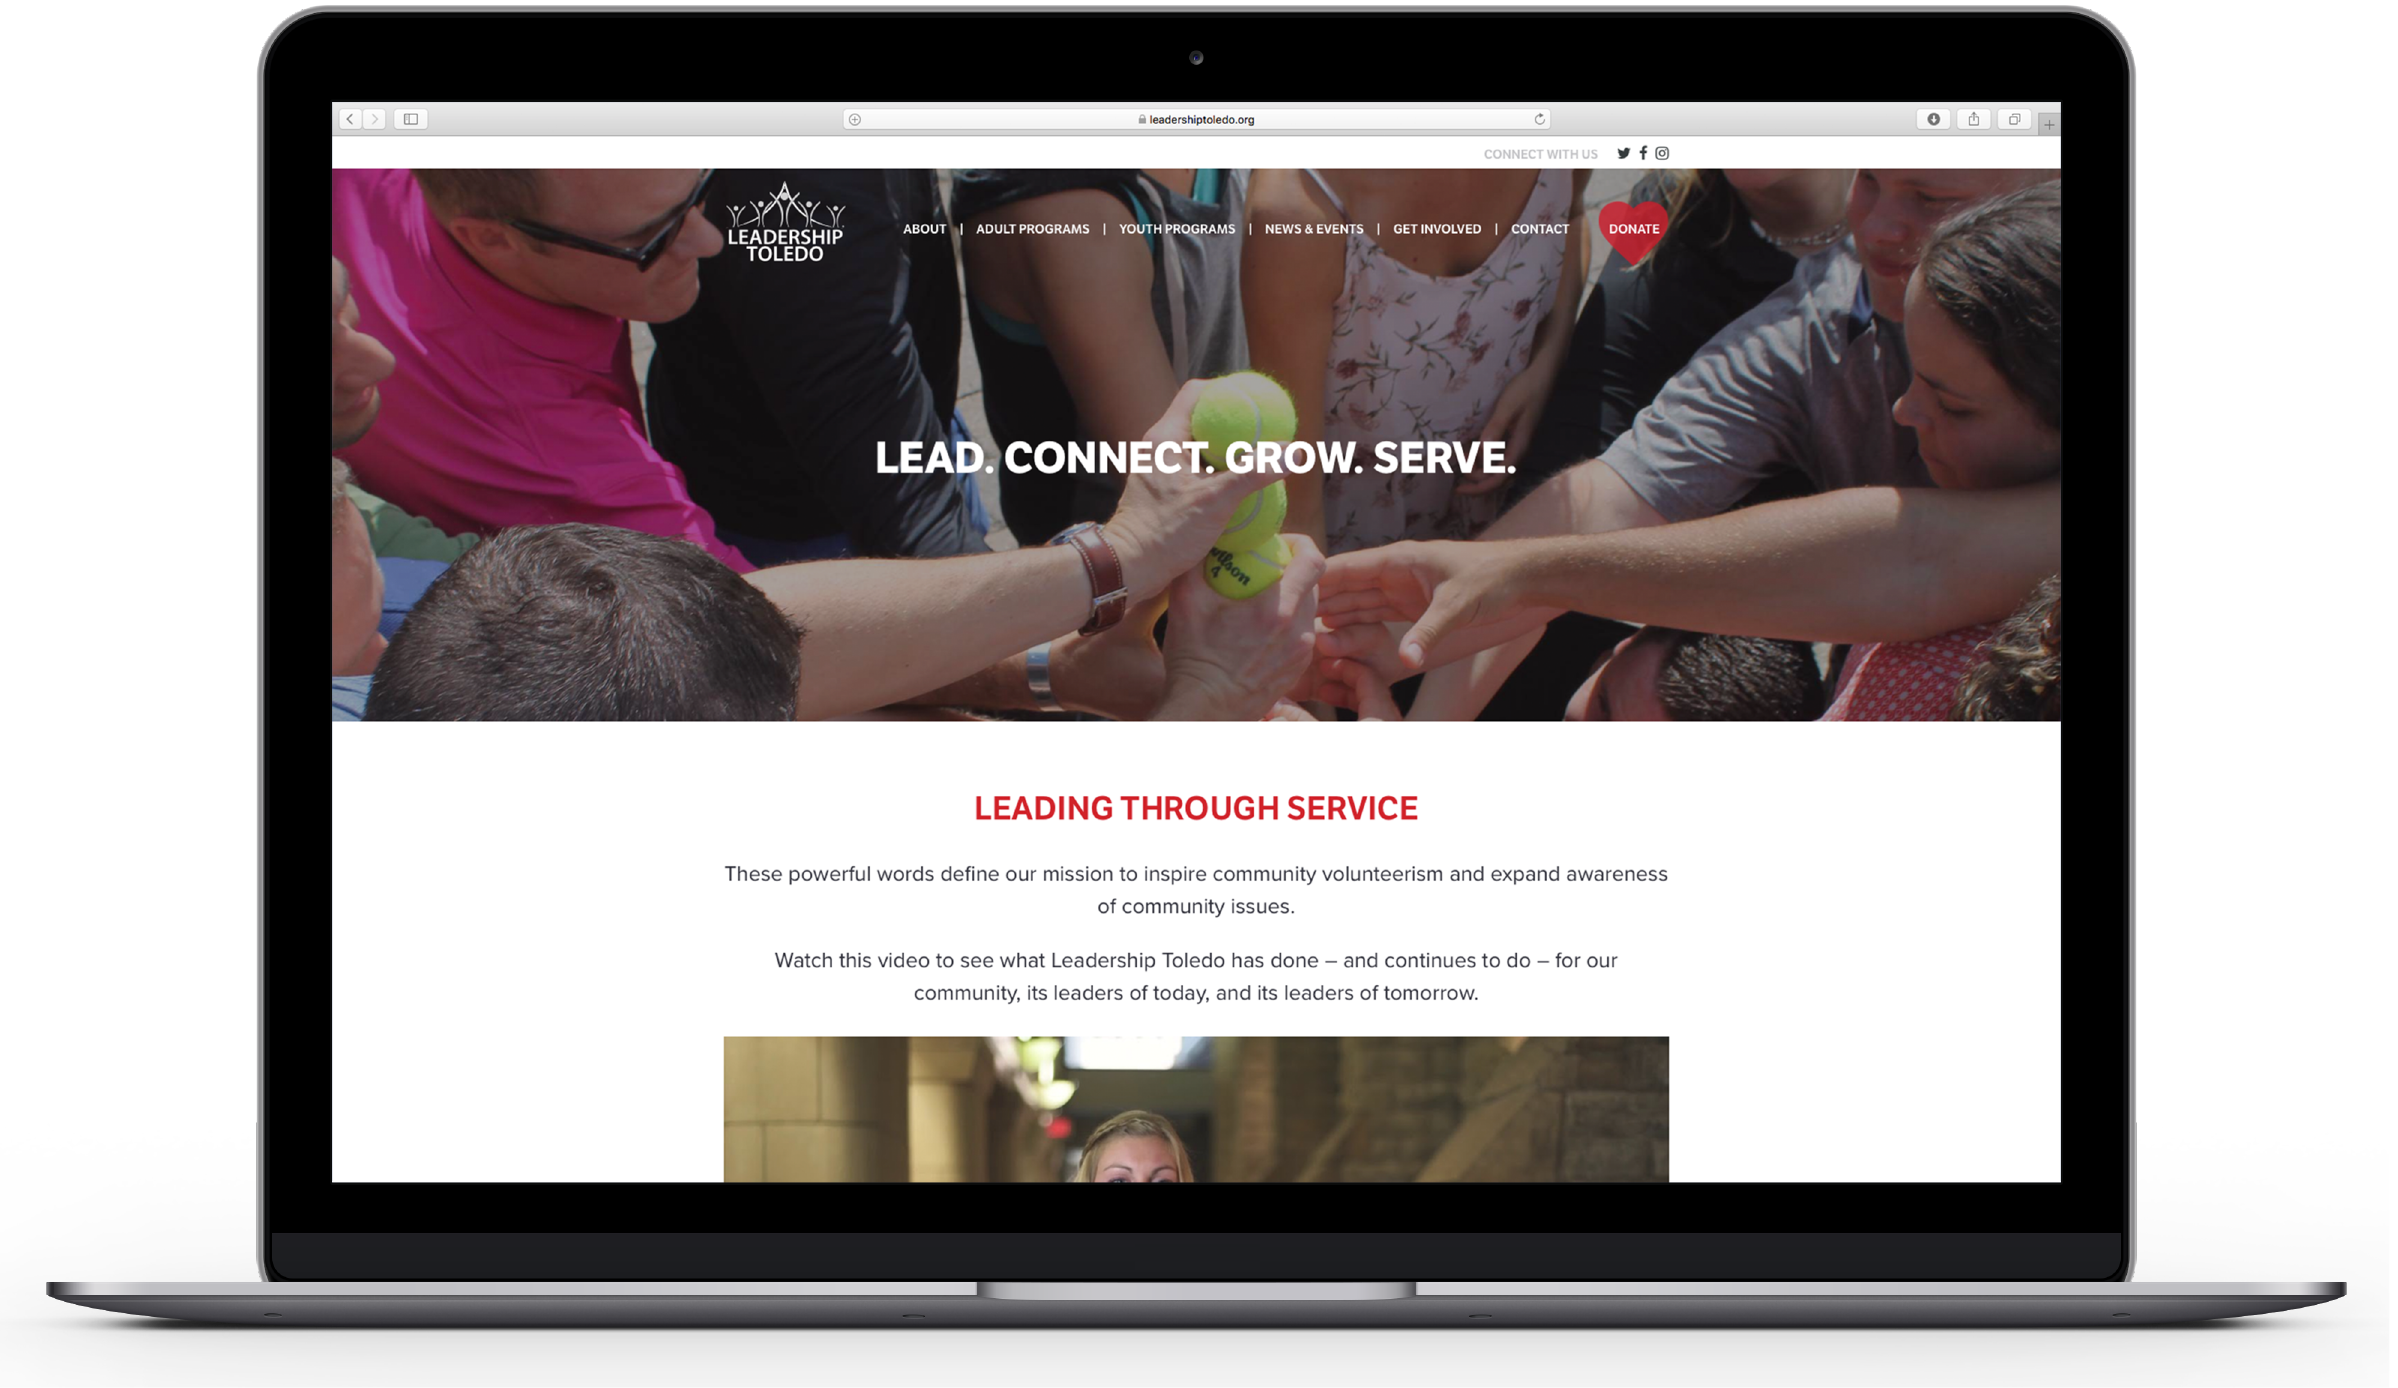 CG developed leadershiptoledo.com using many images that convey what their organization does—while also bringing a human element to the design. 